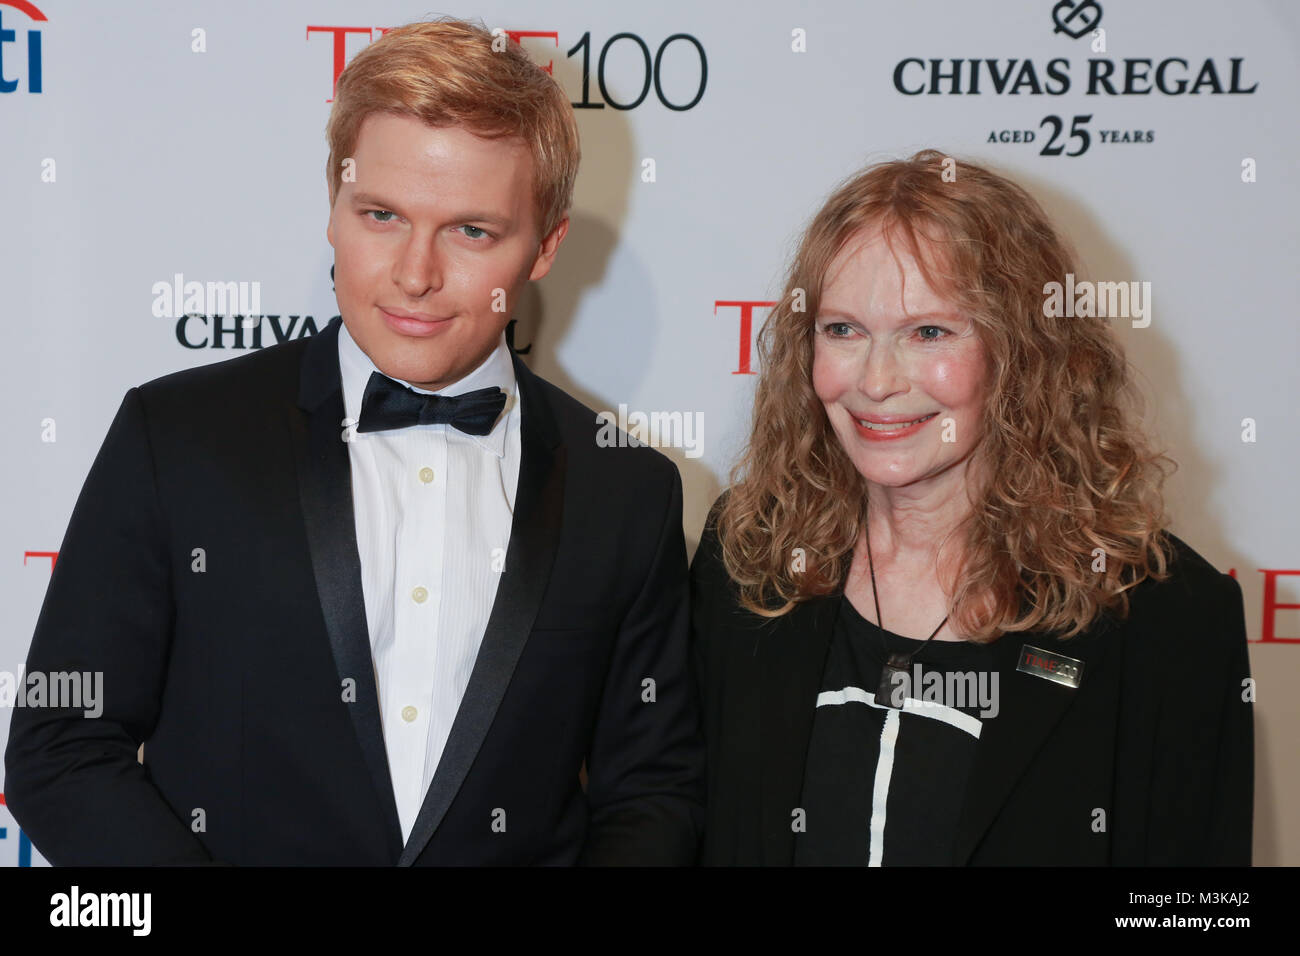 Ronan Farrow and Mia Farrow attend the TIME 100 Gala at Lincoln Center on April 21, 2015 in New York City. Stock Photo